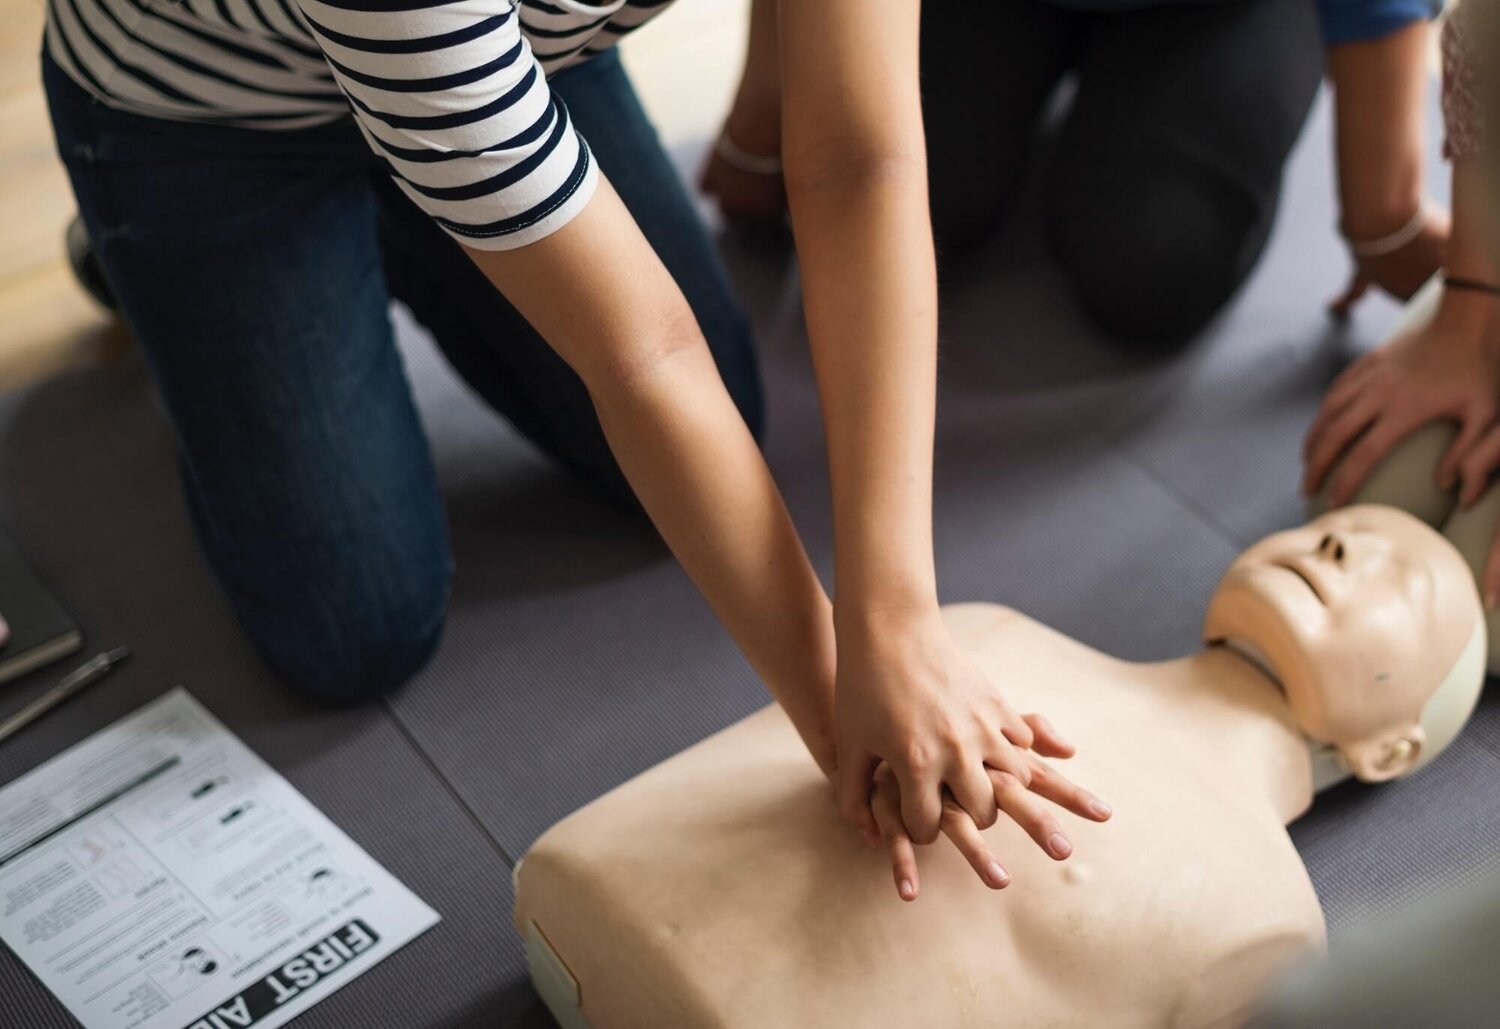 First Aid Responder (FAR) REFRESHER Course with MG Training — MG Training